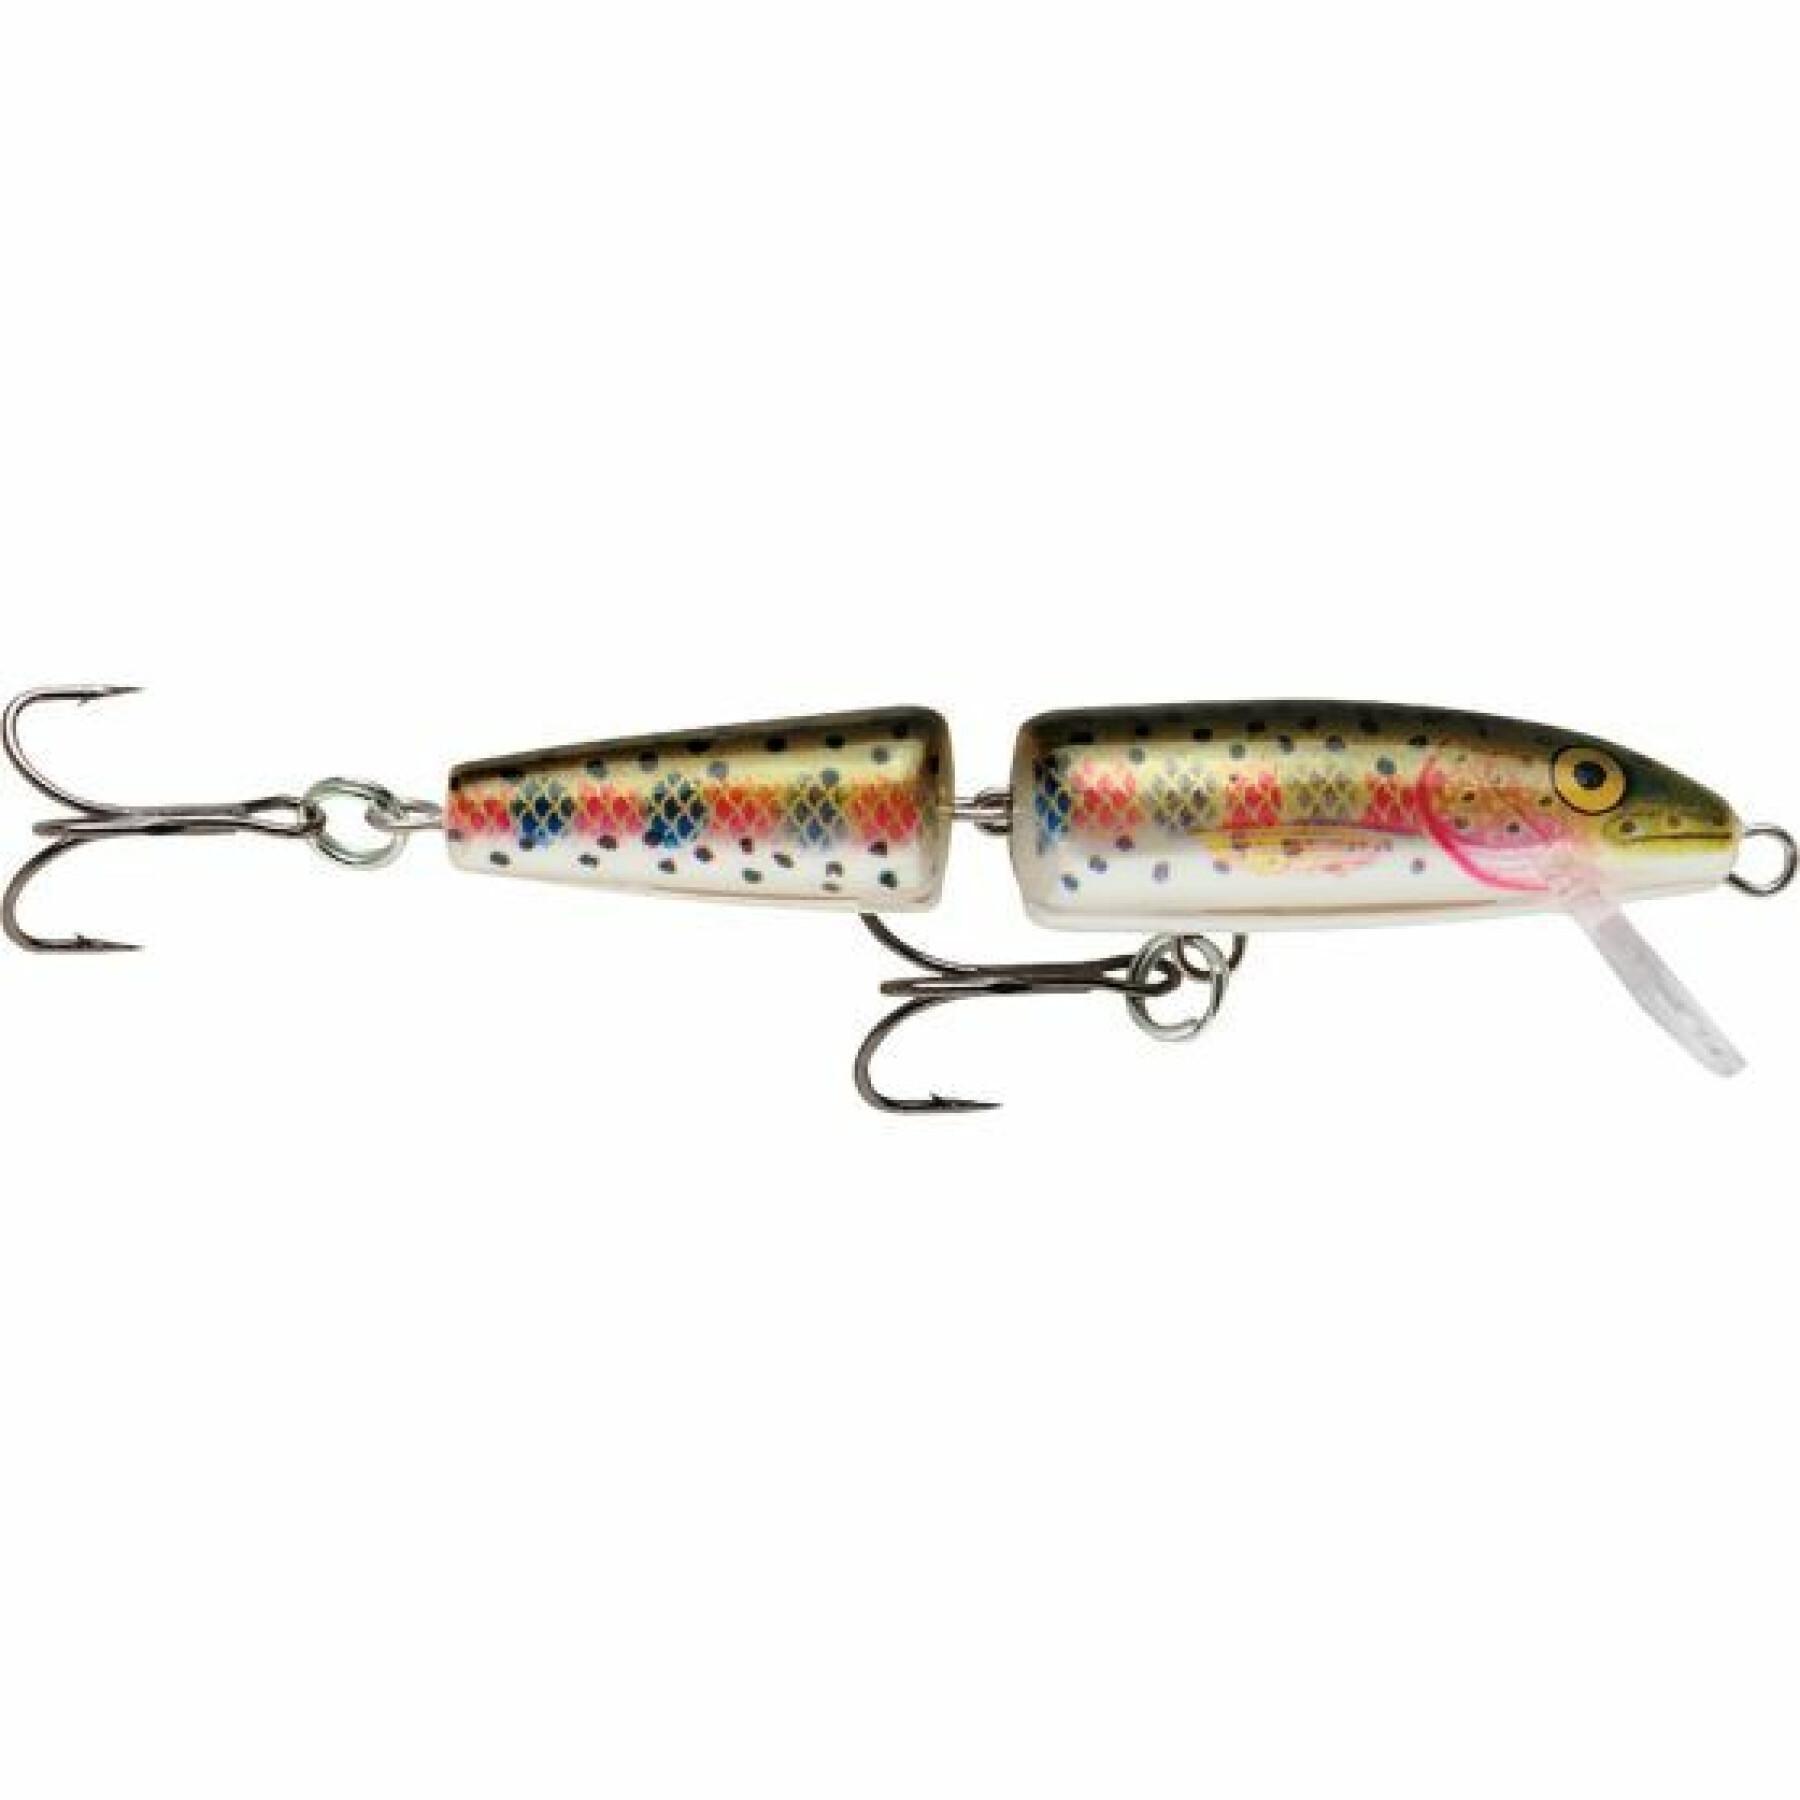 Lure Rapala jointed® 7g